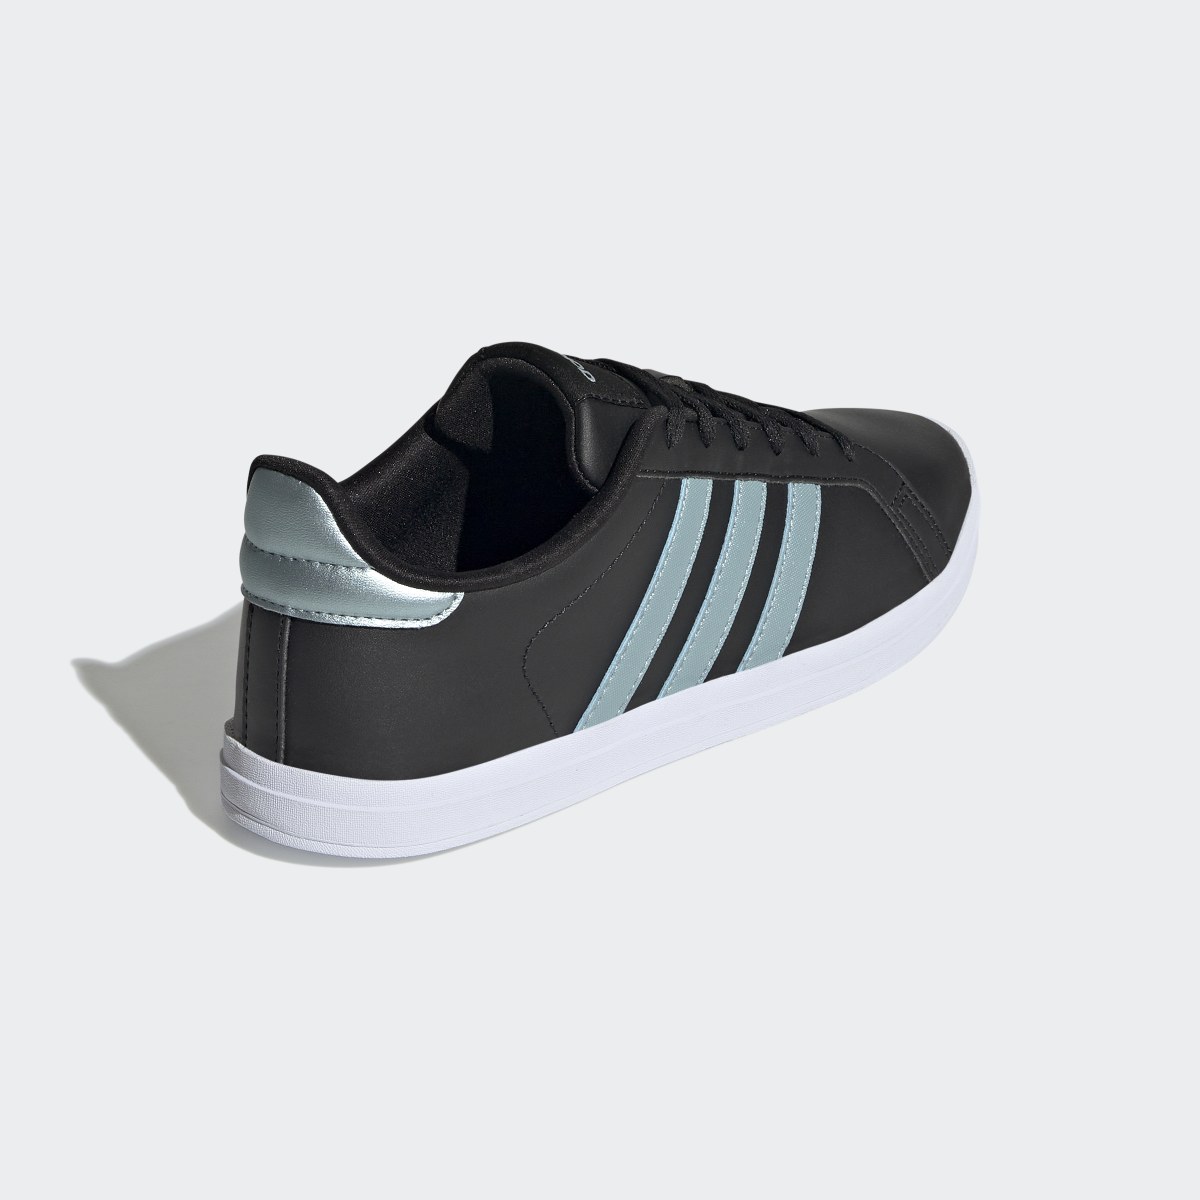 Adidas Courtpoint Shoes. 6